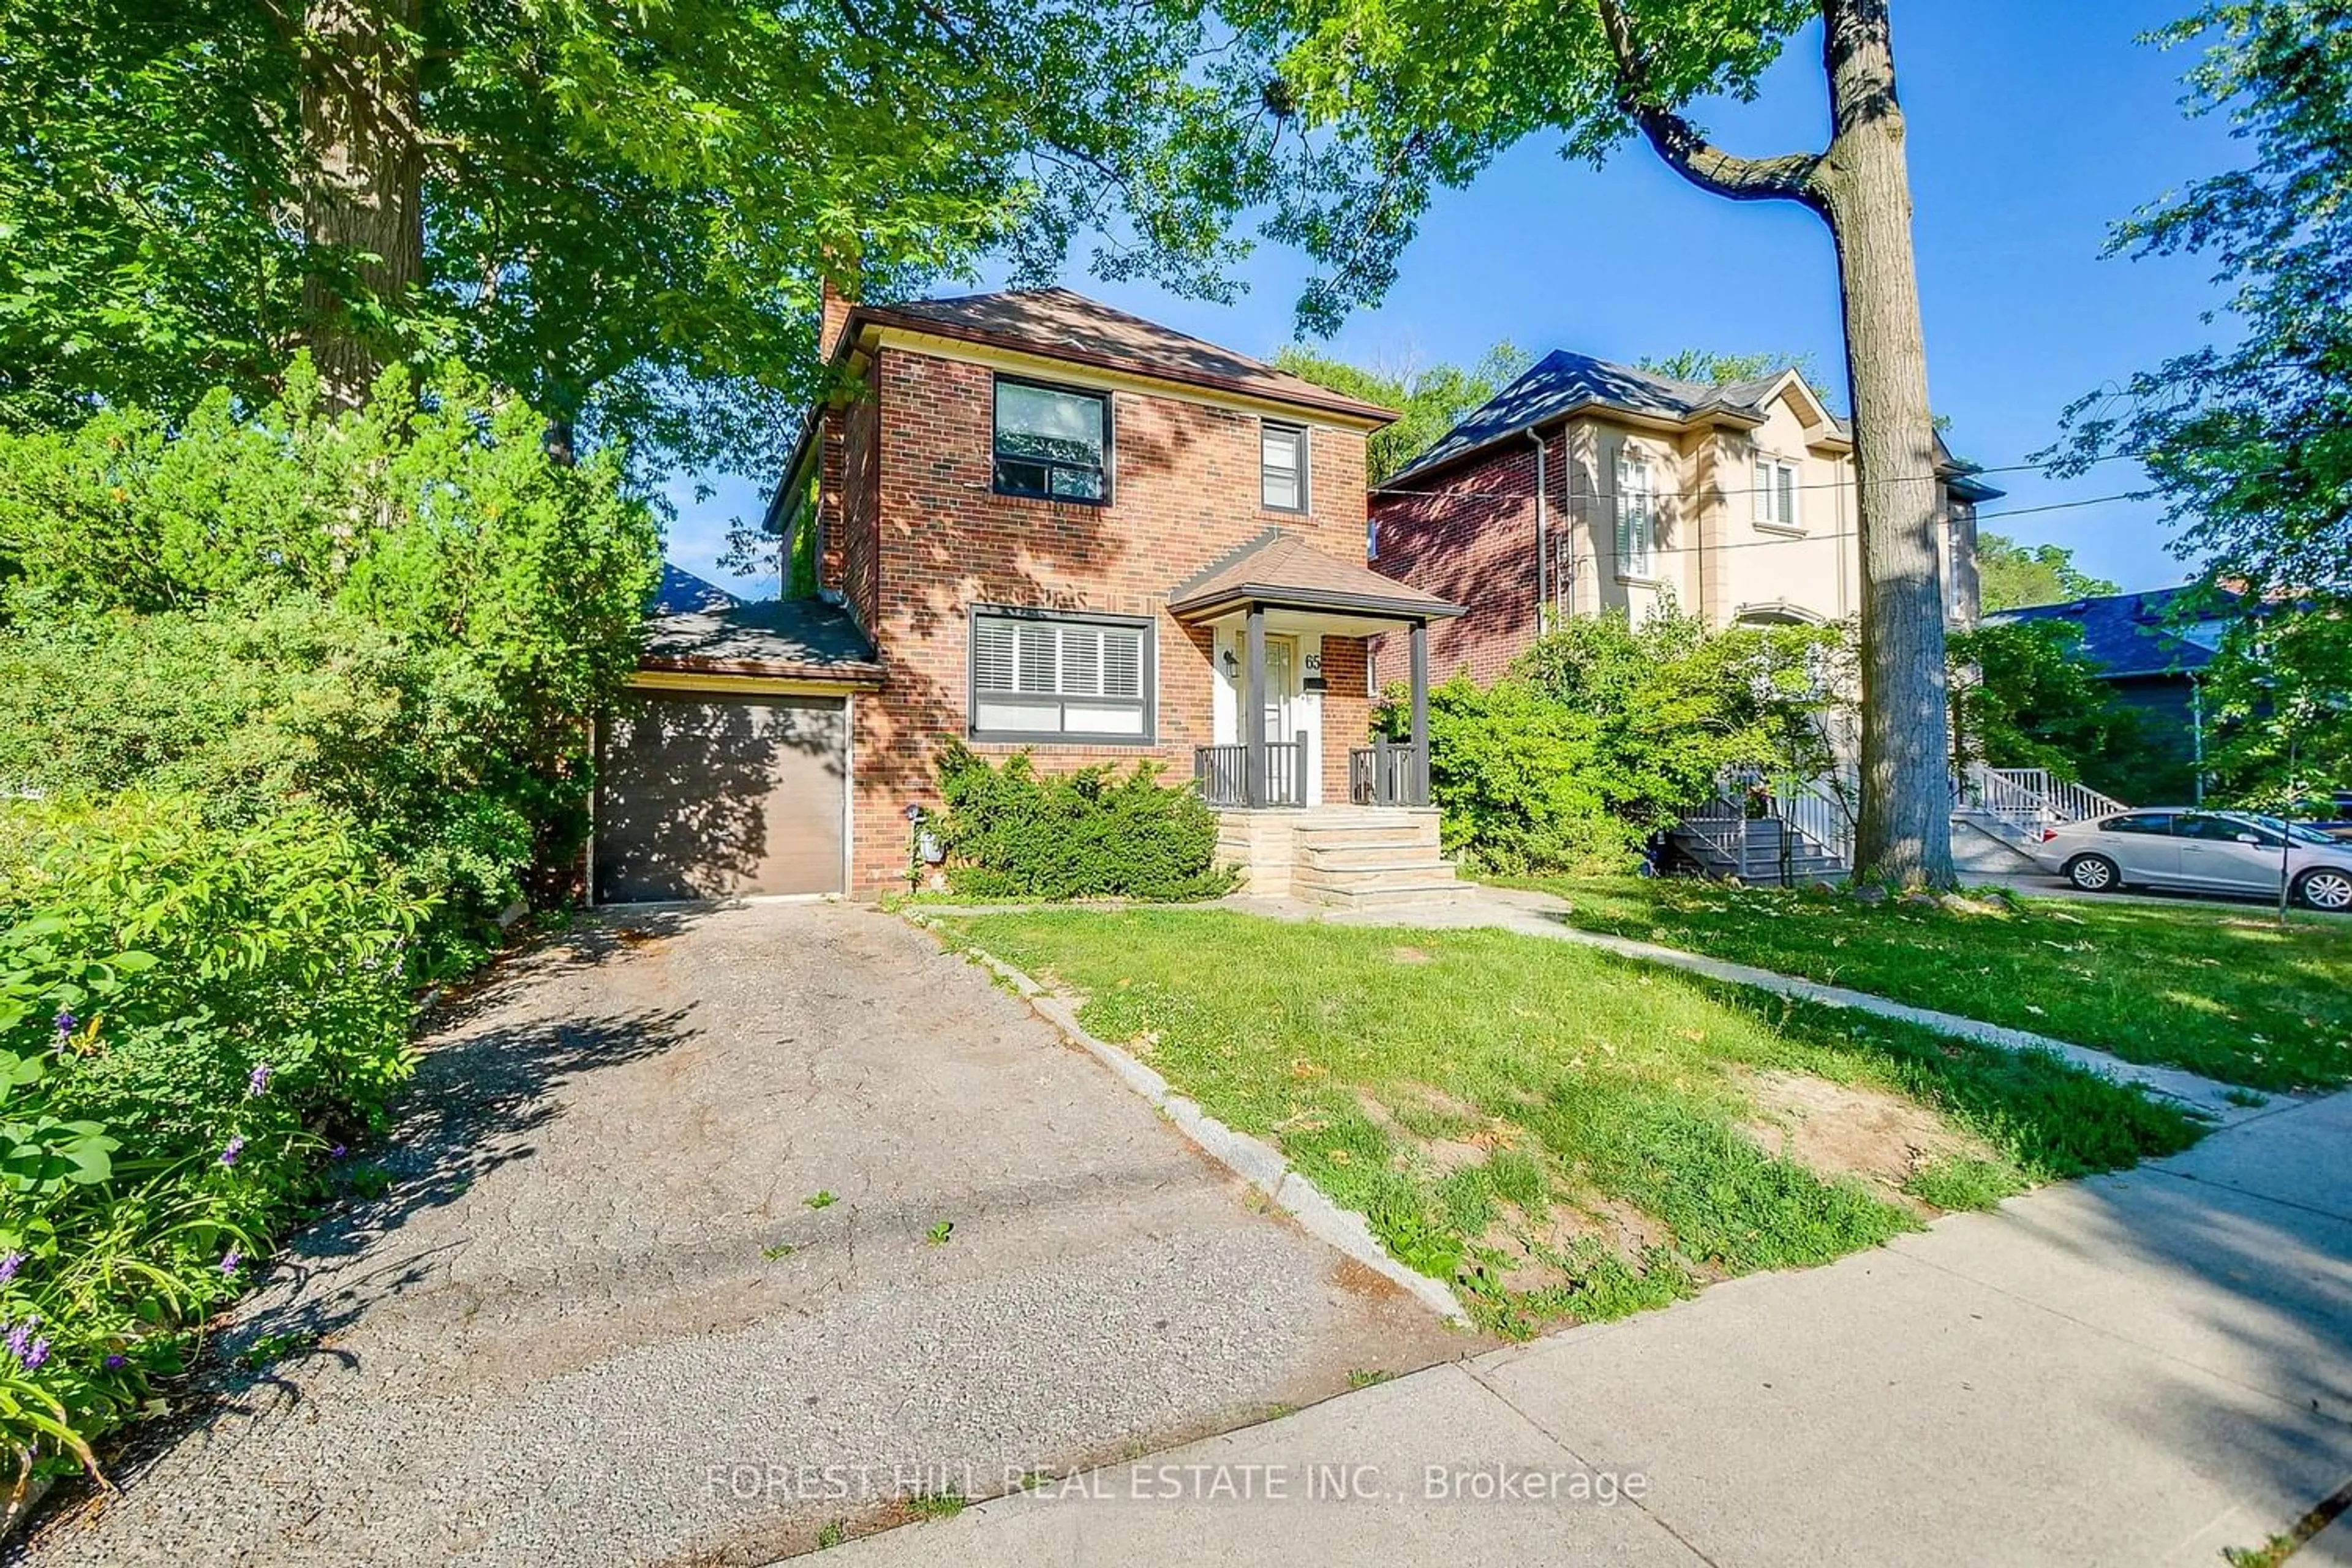 Street view for 65 Long Branch Ave, Toronto Ontario M8W 3J3